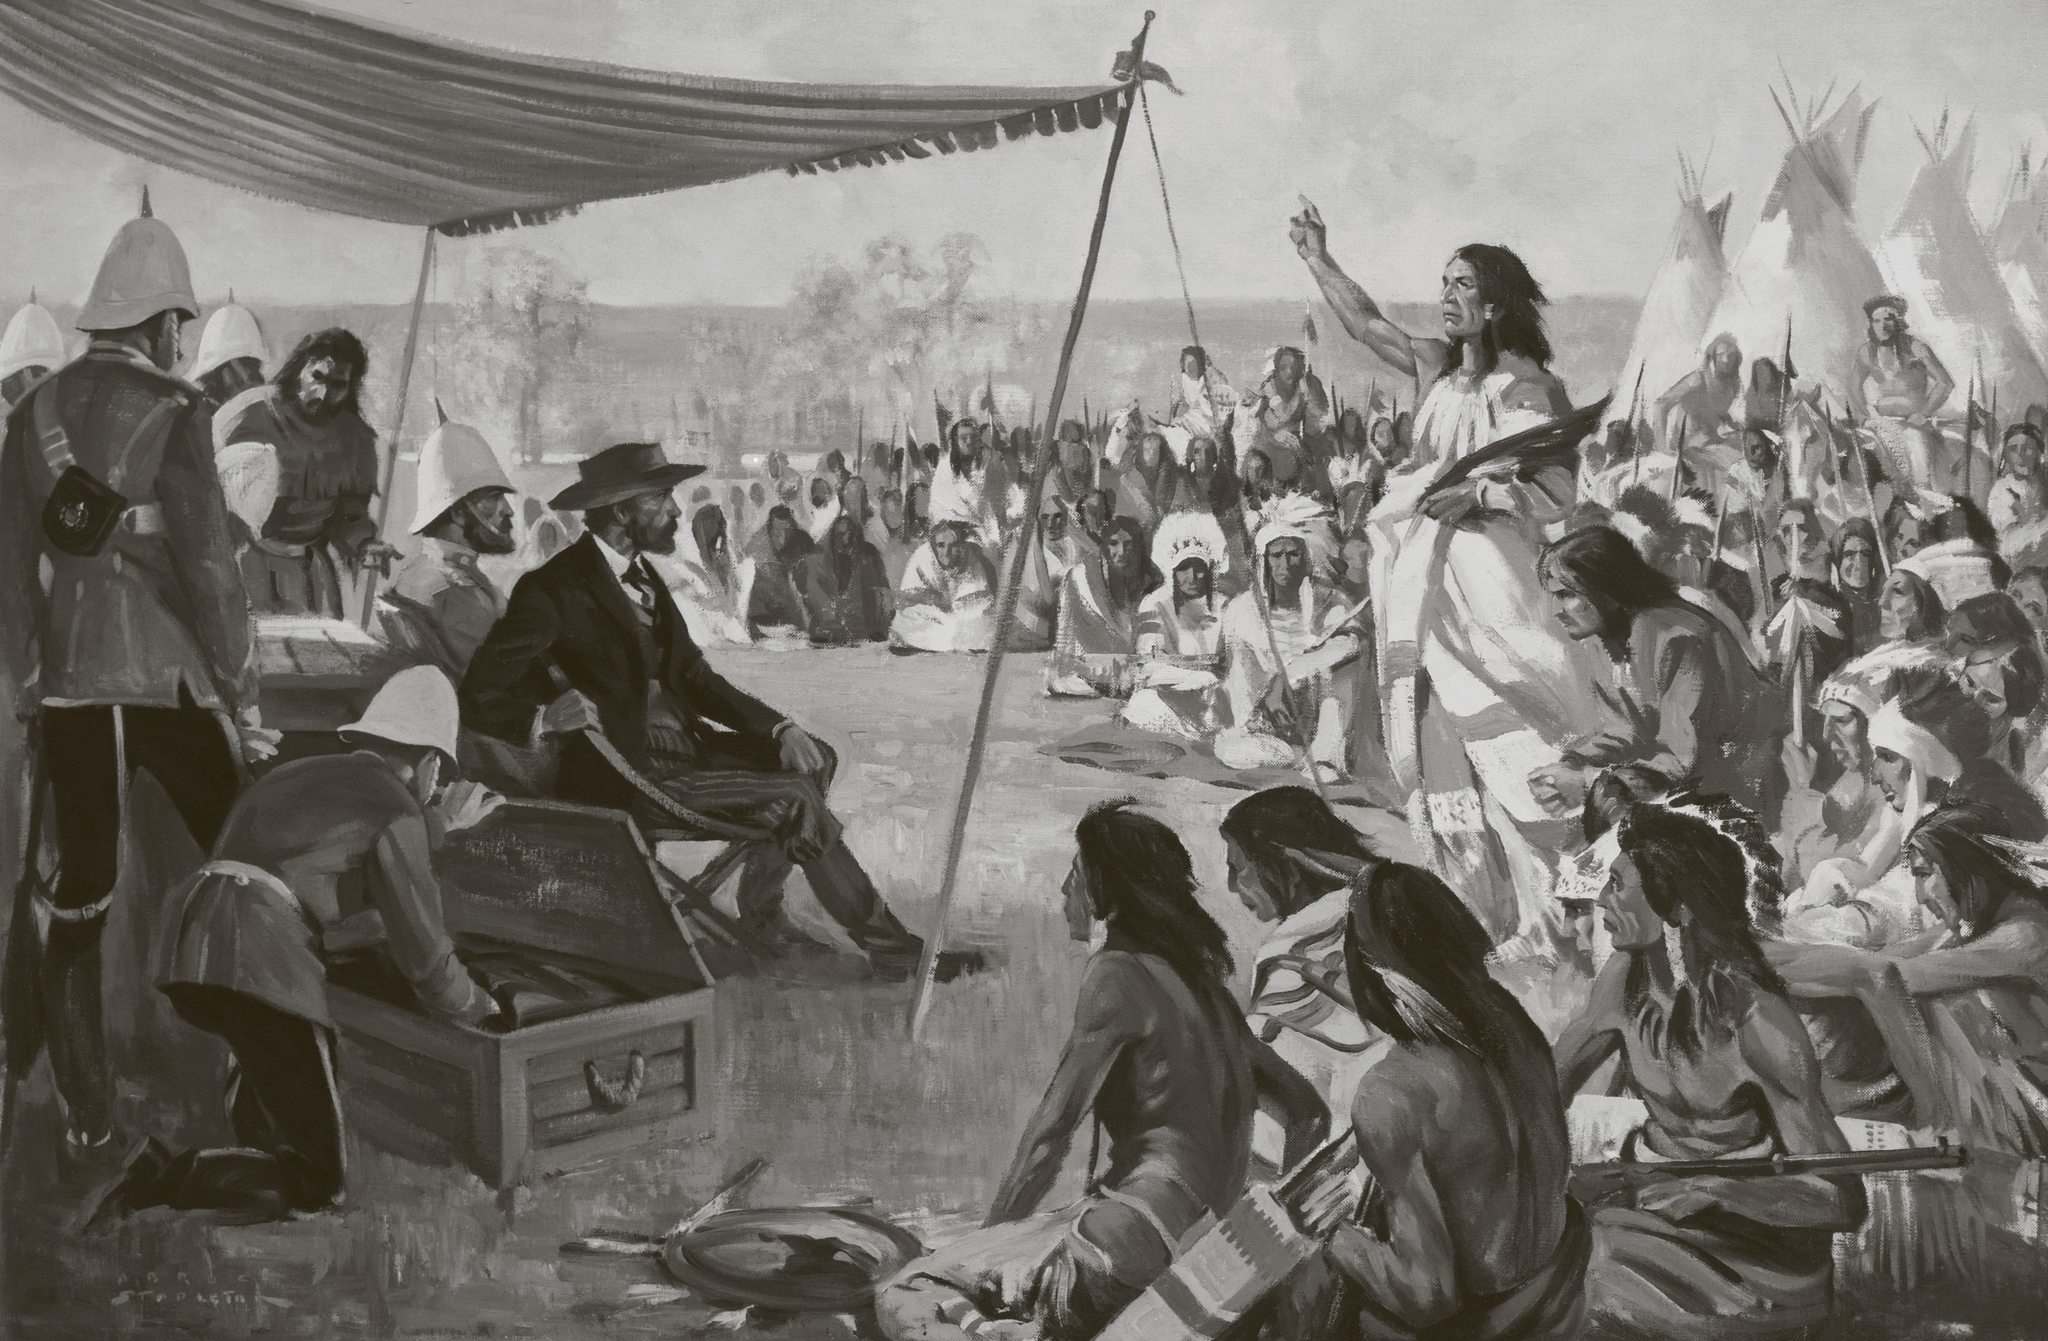 A Hard Bargain: Comprehensive history of treaty negotiations reframes many Indigenous issues